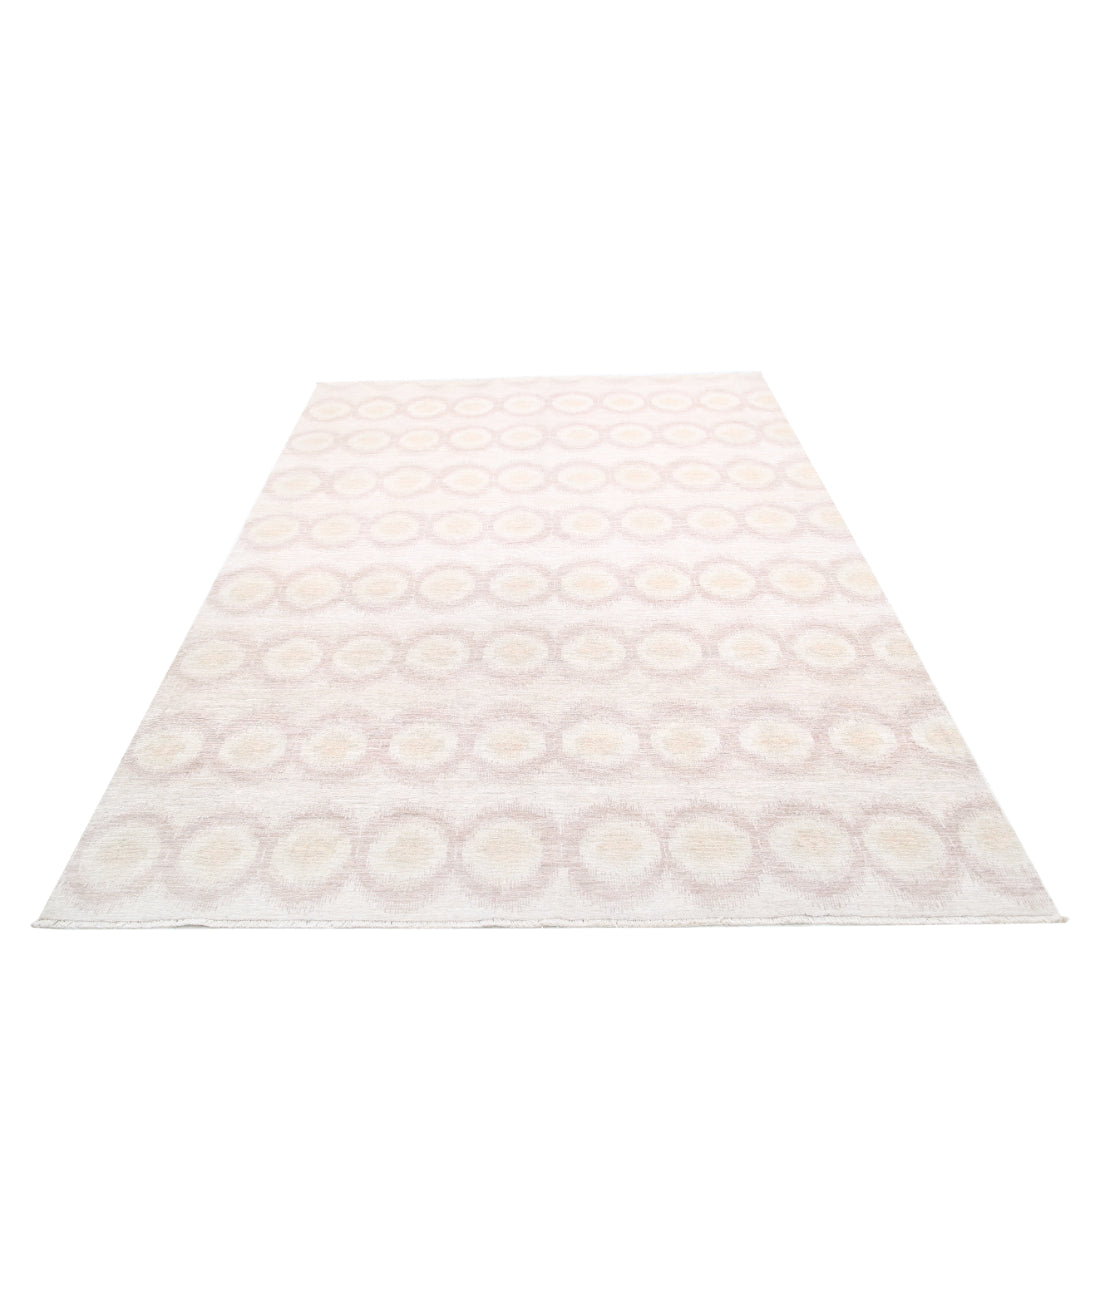 Hand Knotted Ikat Wool Rug - 6'1'' x 8'7'' 6'1'' x 8'7'' (183 X 258) / Ivory / Taupe